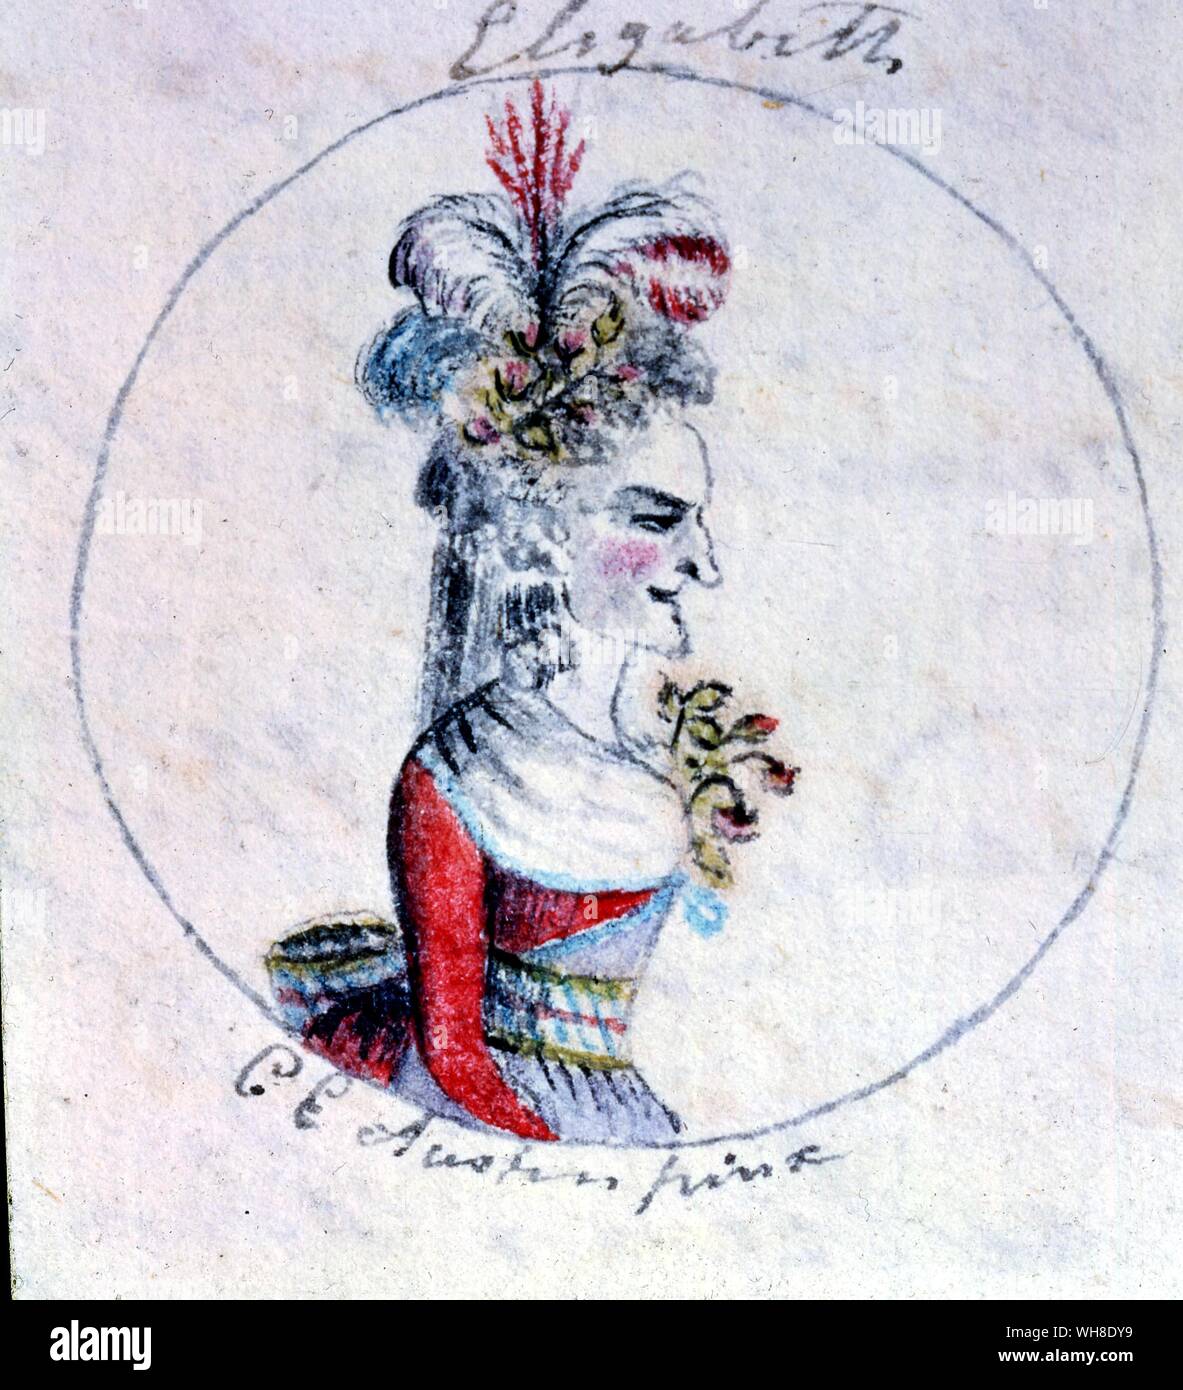 Elizabeth I. Watercolour sketches by Cassandra Austen: One of six sketches for Jane Austen's History of England, 1790. Cassandra Austen, was the elder sister of Jane Austen (1775-1817), to whom she was very close.. Elizabeth I (1533-1603) Queen of England and Queen of Ireland from 17 November 1558 until her death. Elizabeth I was the fifth and final monarch of the Tudor dynasty, having succeeded her half-sister, Mary I. She reigned during a period of turmoil in English history.. Stock Photo